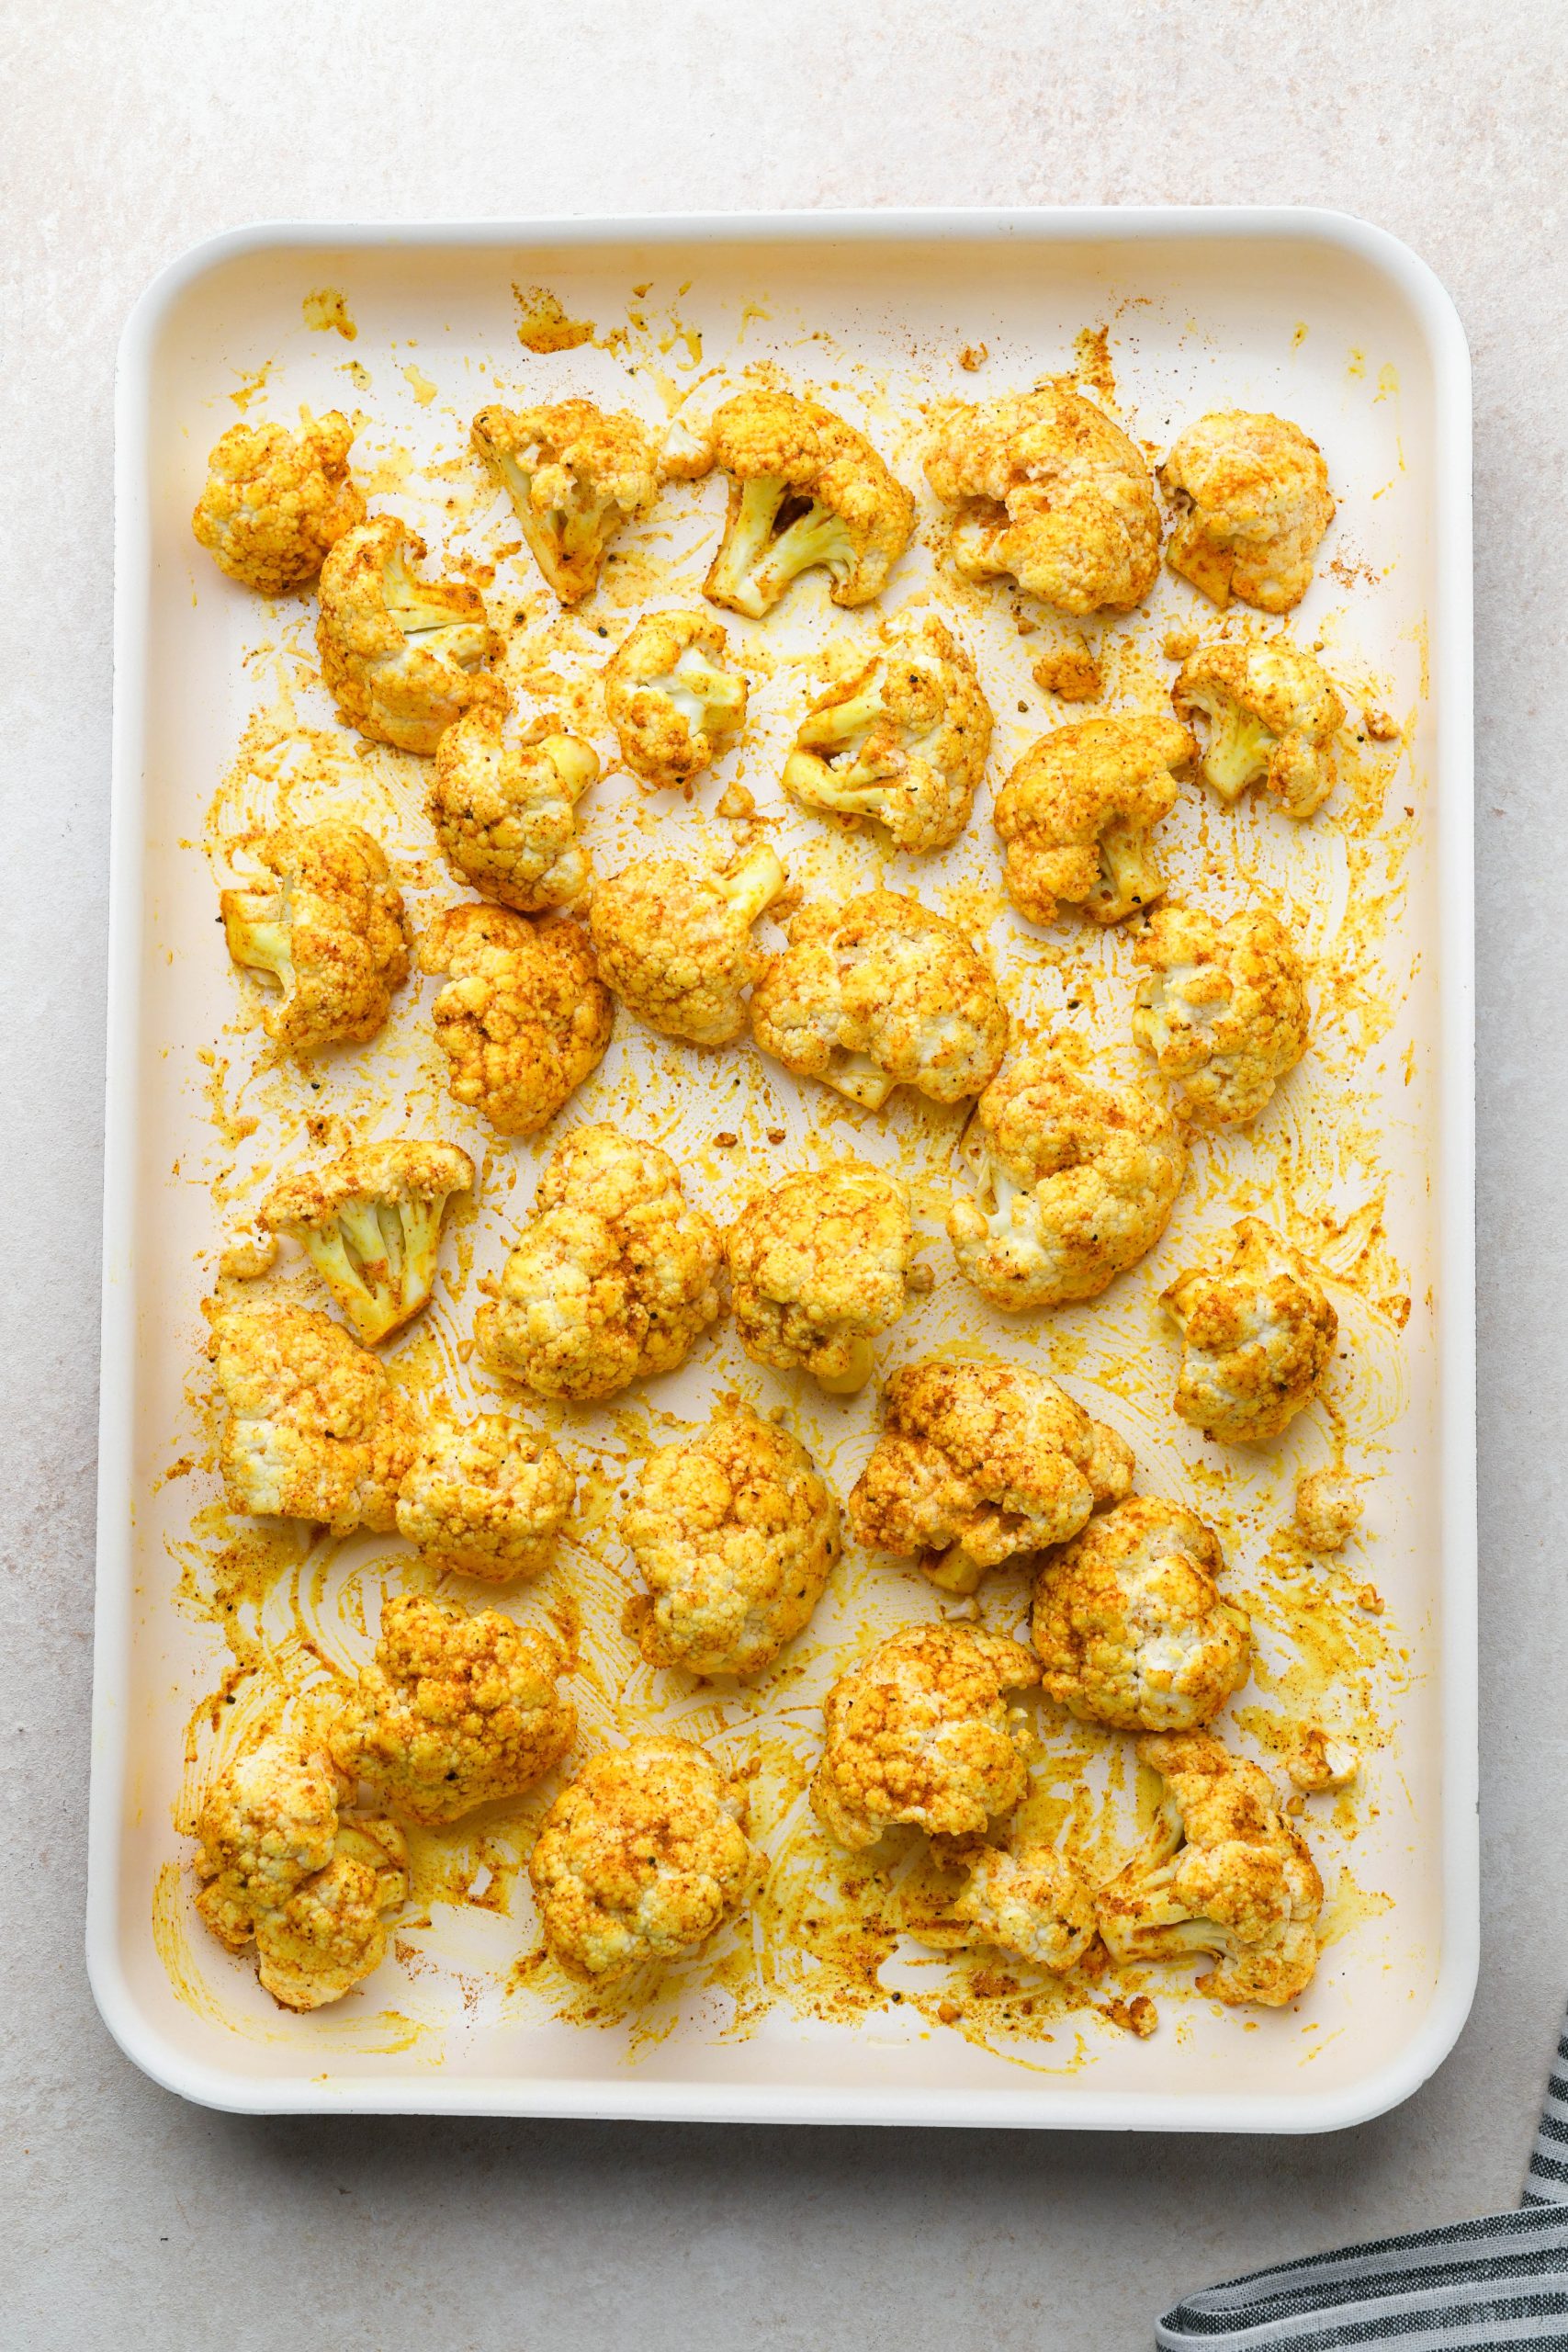 How to make Turmeric Roasted Cauliflower: Raw cauliflower florets tossed with oil and spices before roasting.